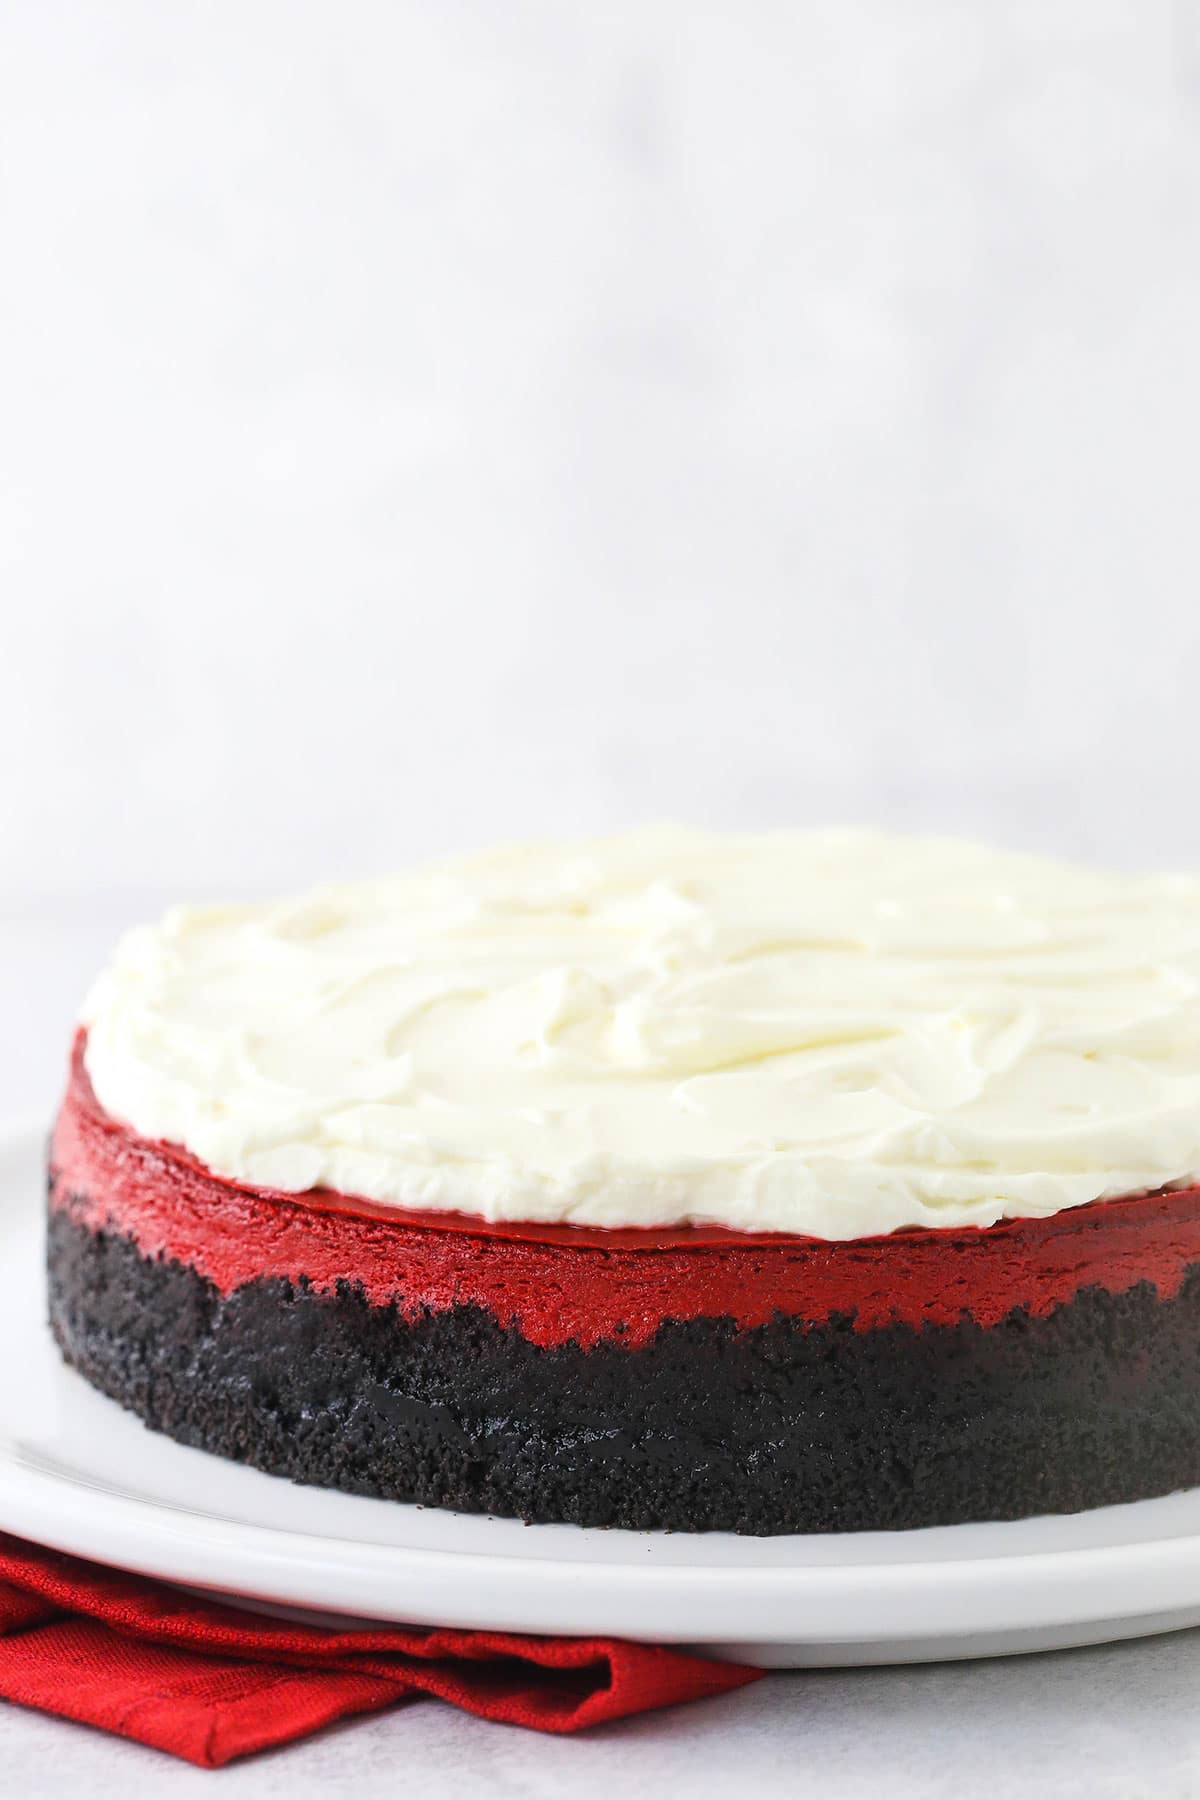 A red velvet cheesecake on a large round serving platter with a red napkin underneath it